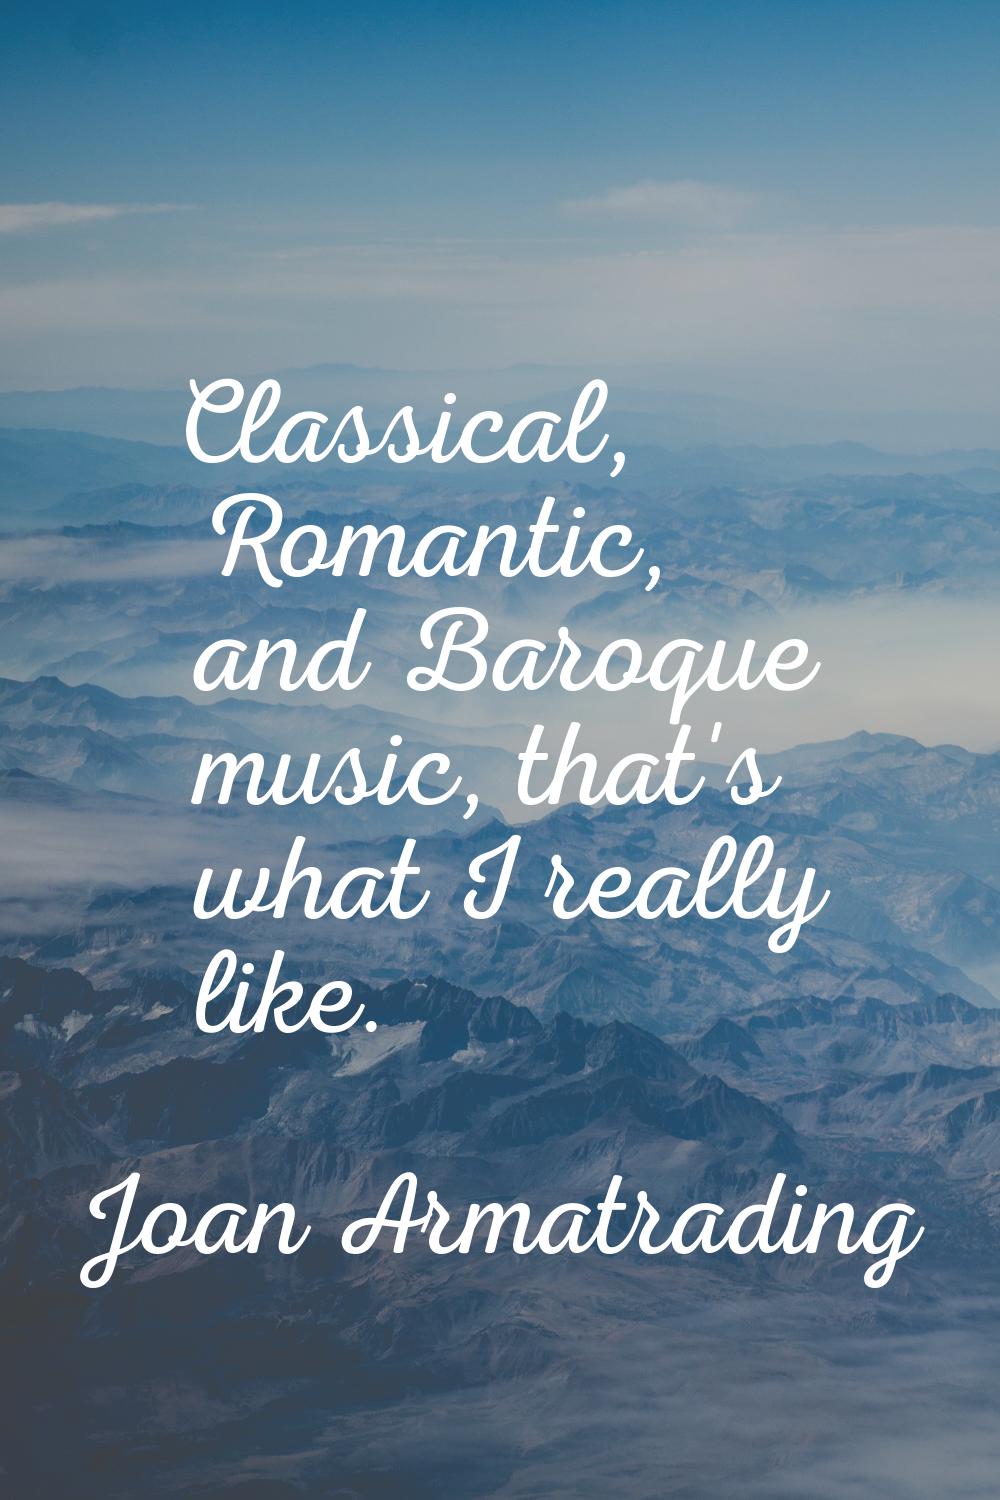 Classical, Romantic, and Baroque music, that's what I really like.